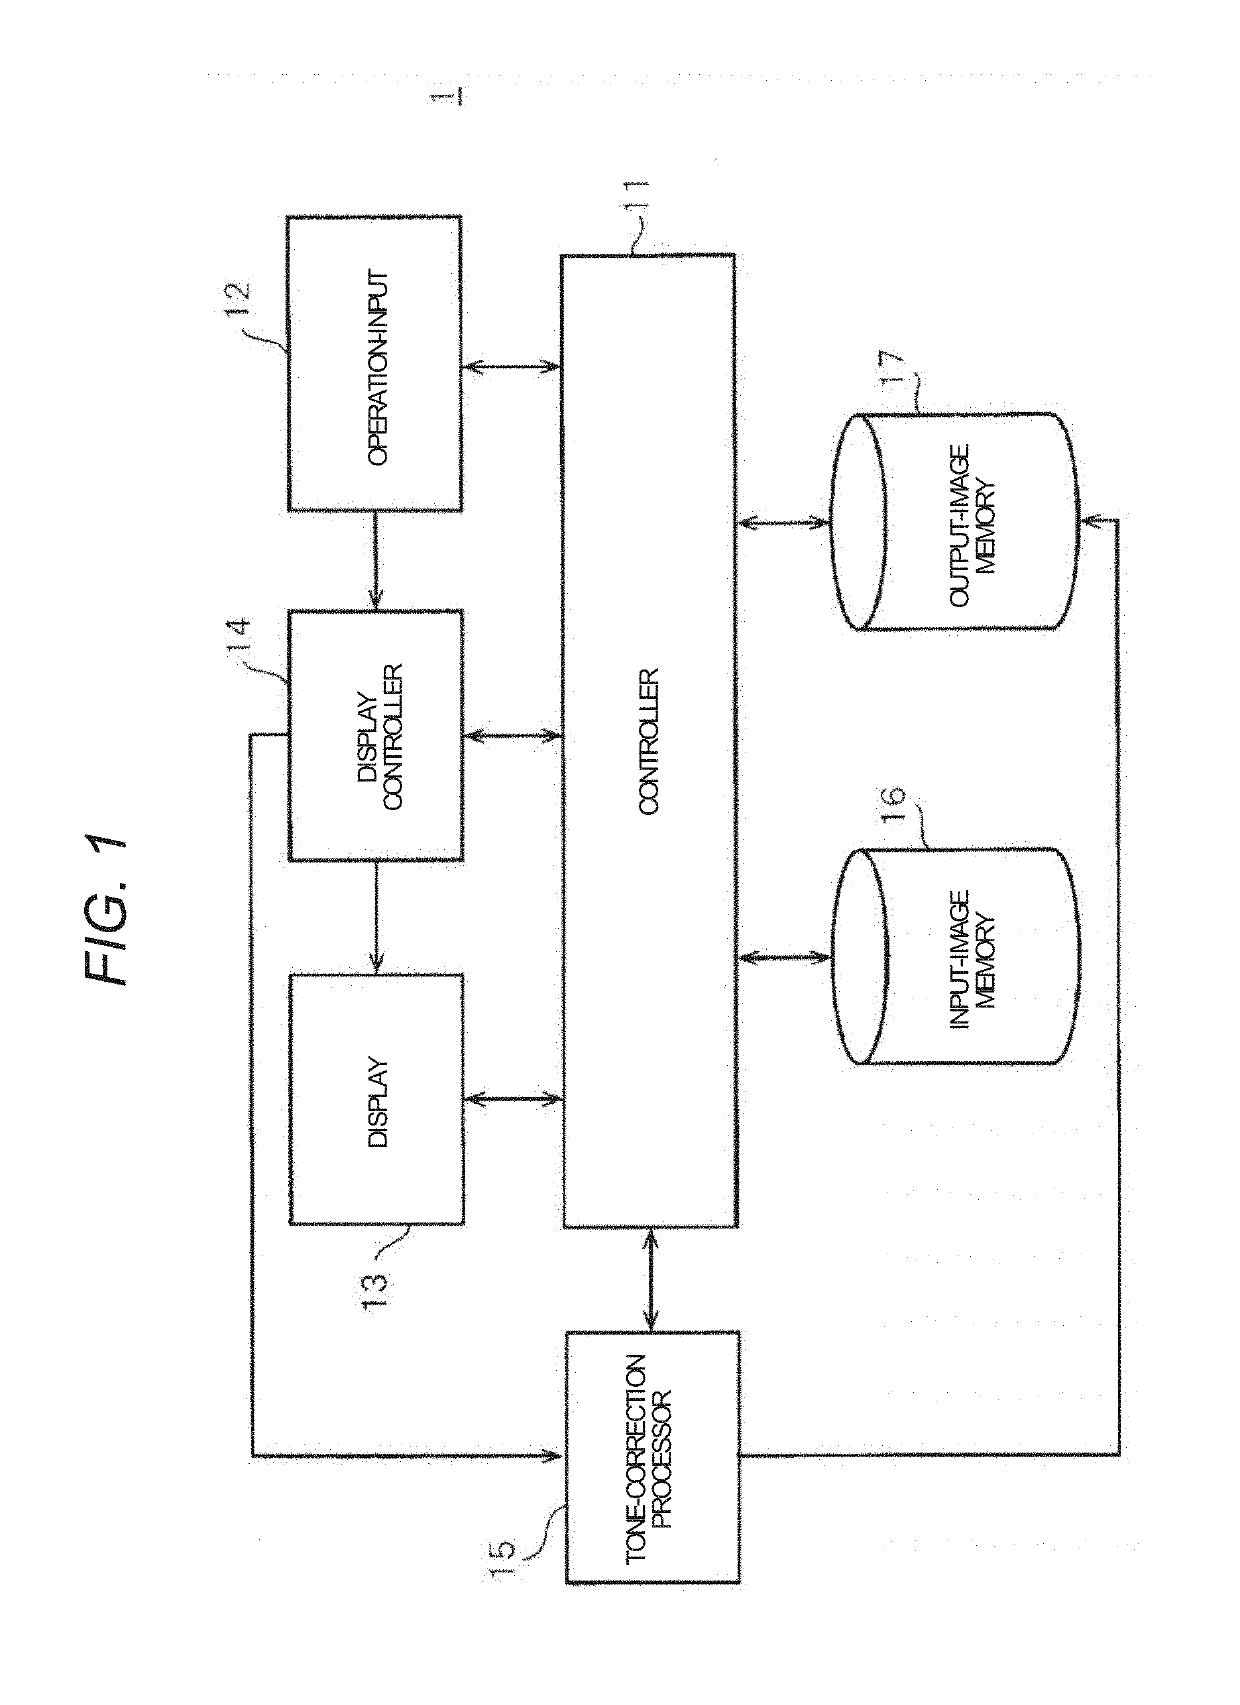 Image processing device and image processing method which process an image based on histogram data in the image